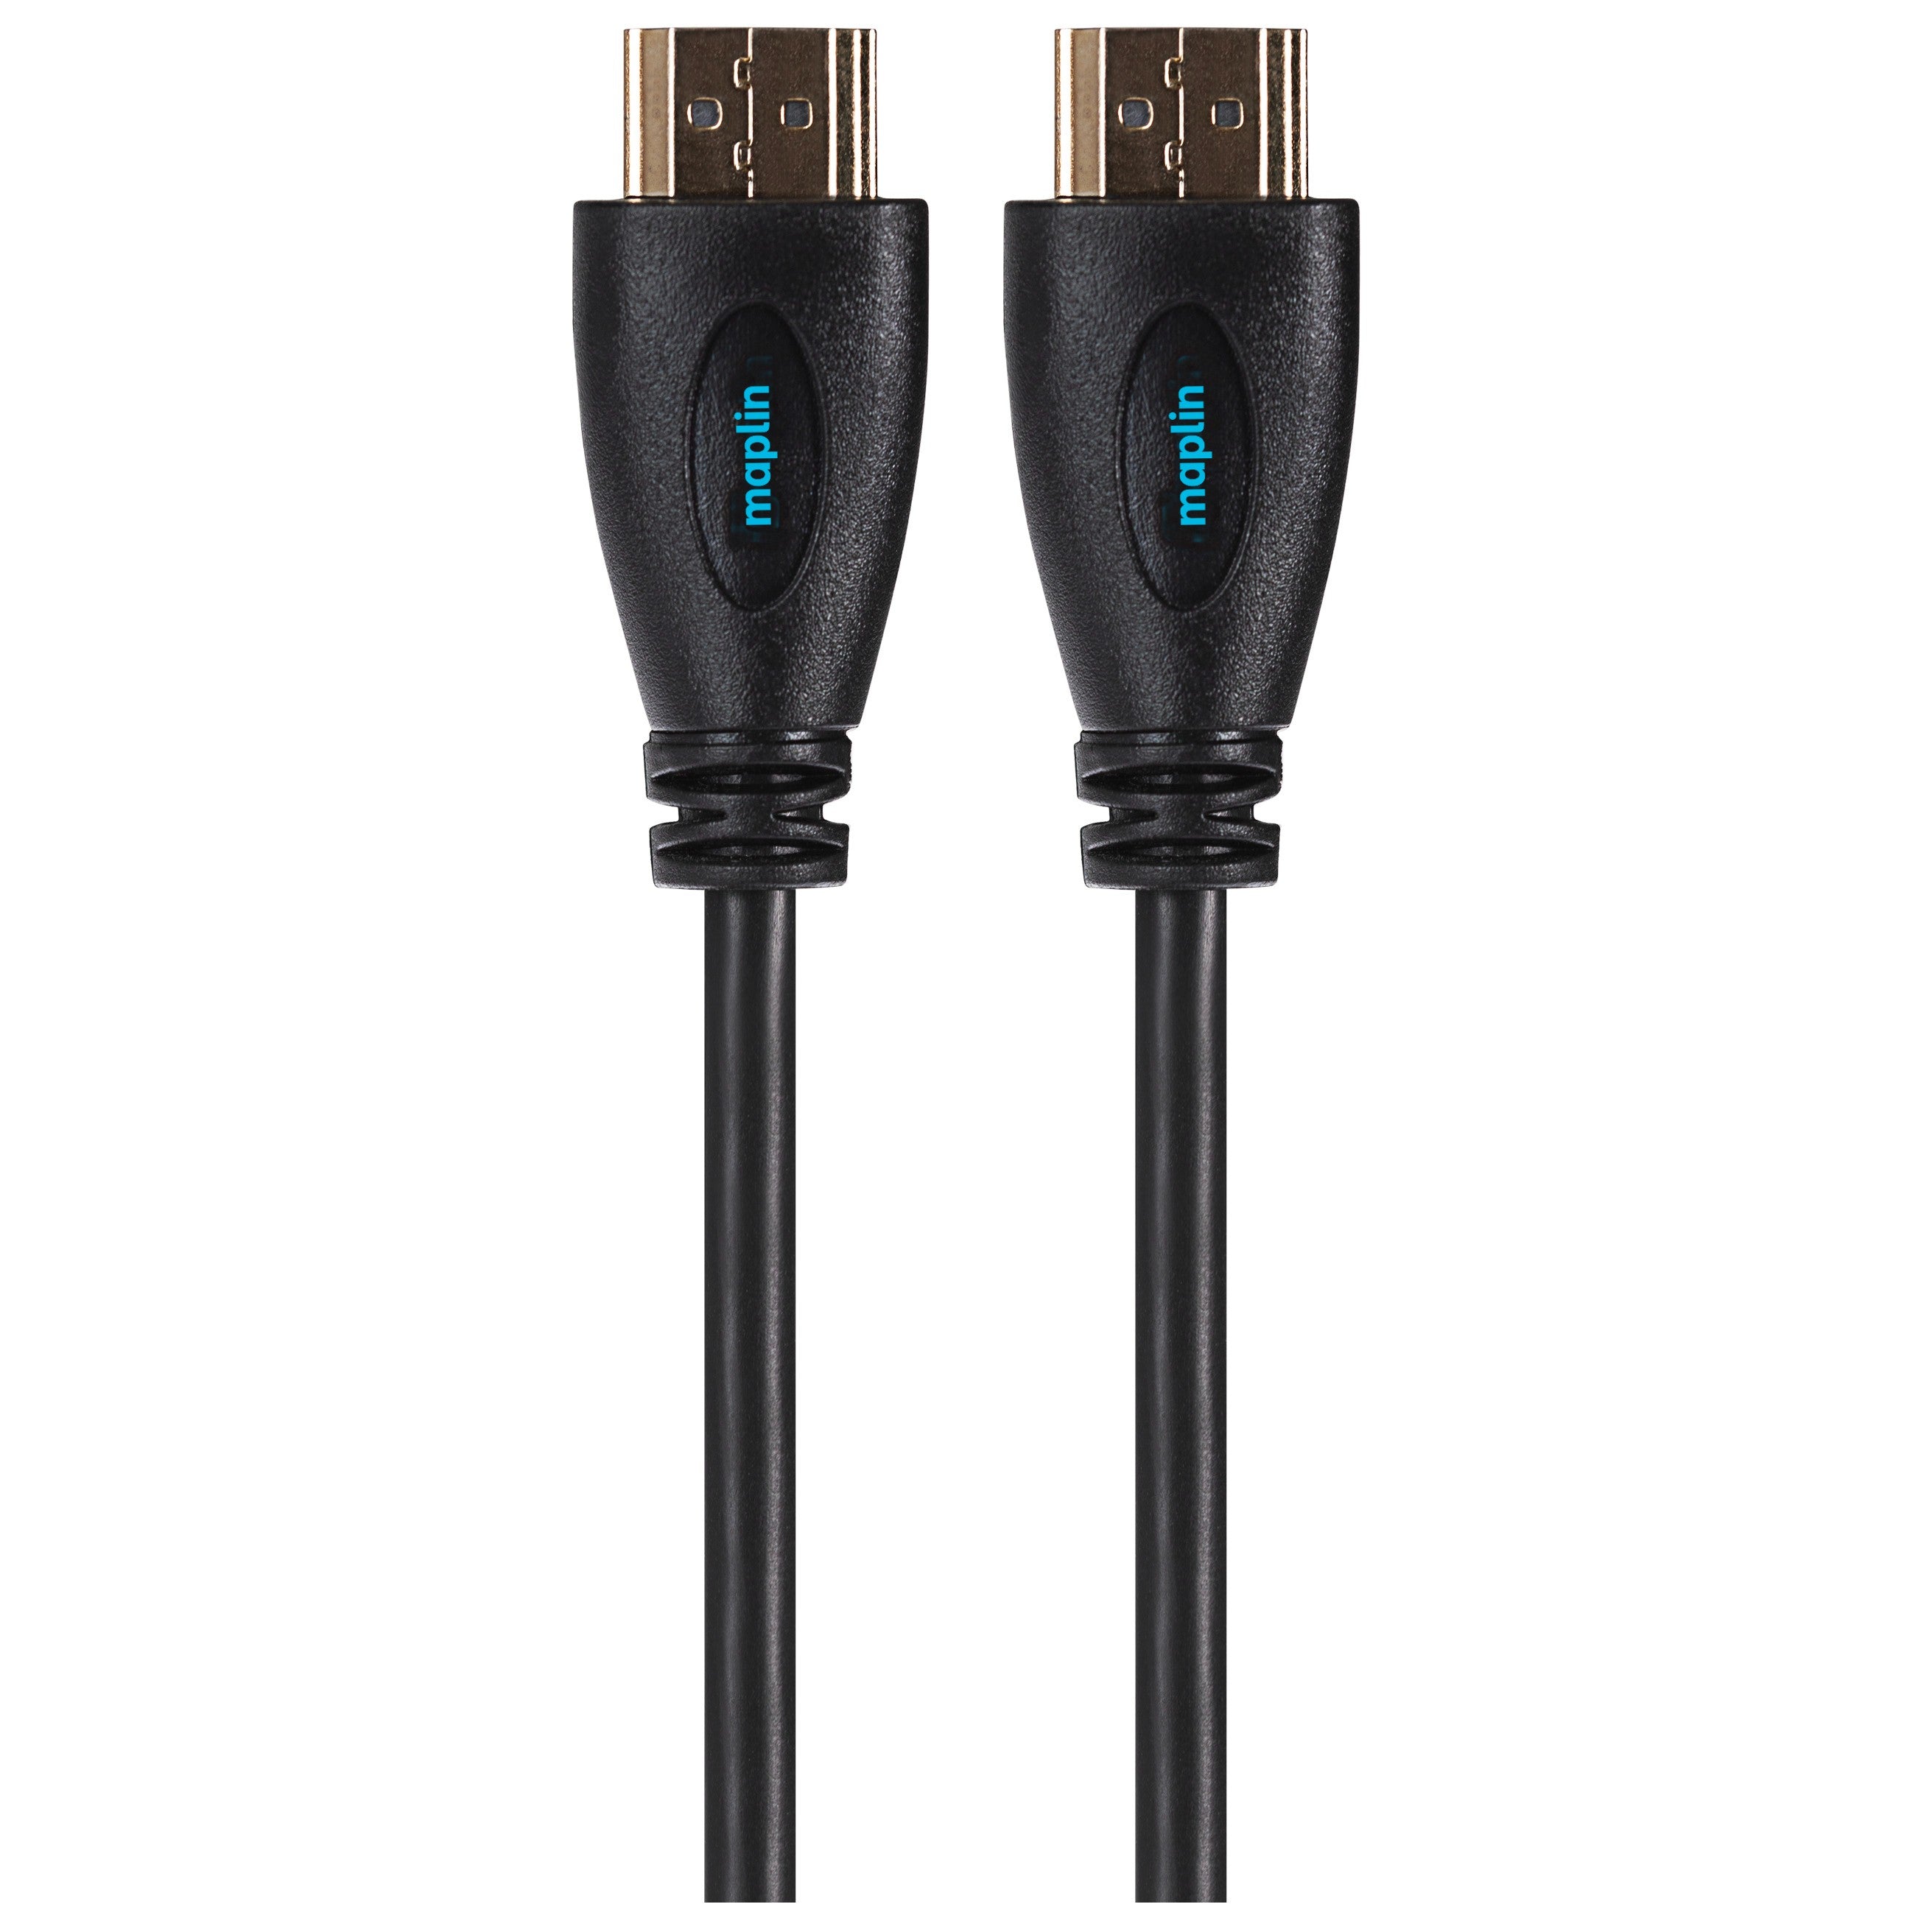 Maplin Thin HDMI to HDMI 4K Ultra HD Cable with Ethernet & Gold Connectors - Black, 3m